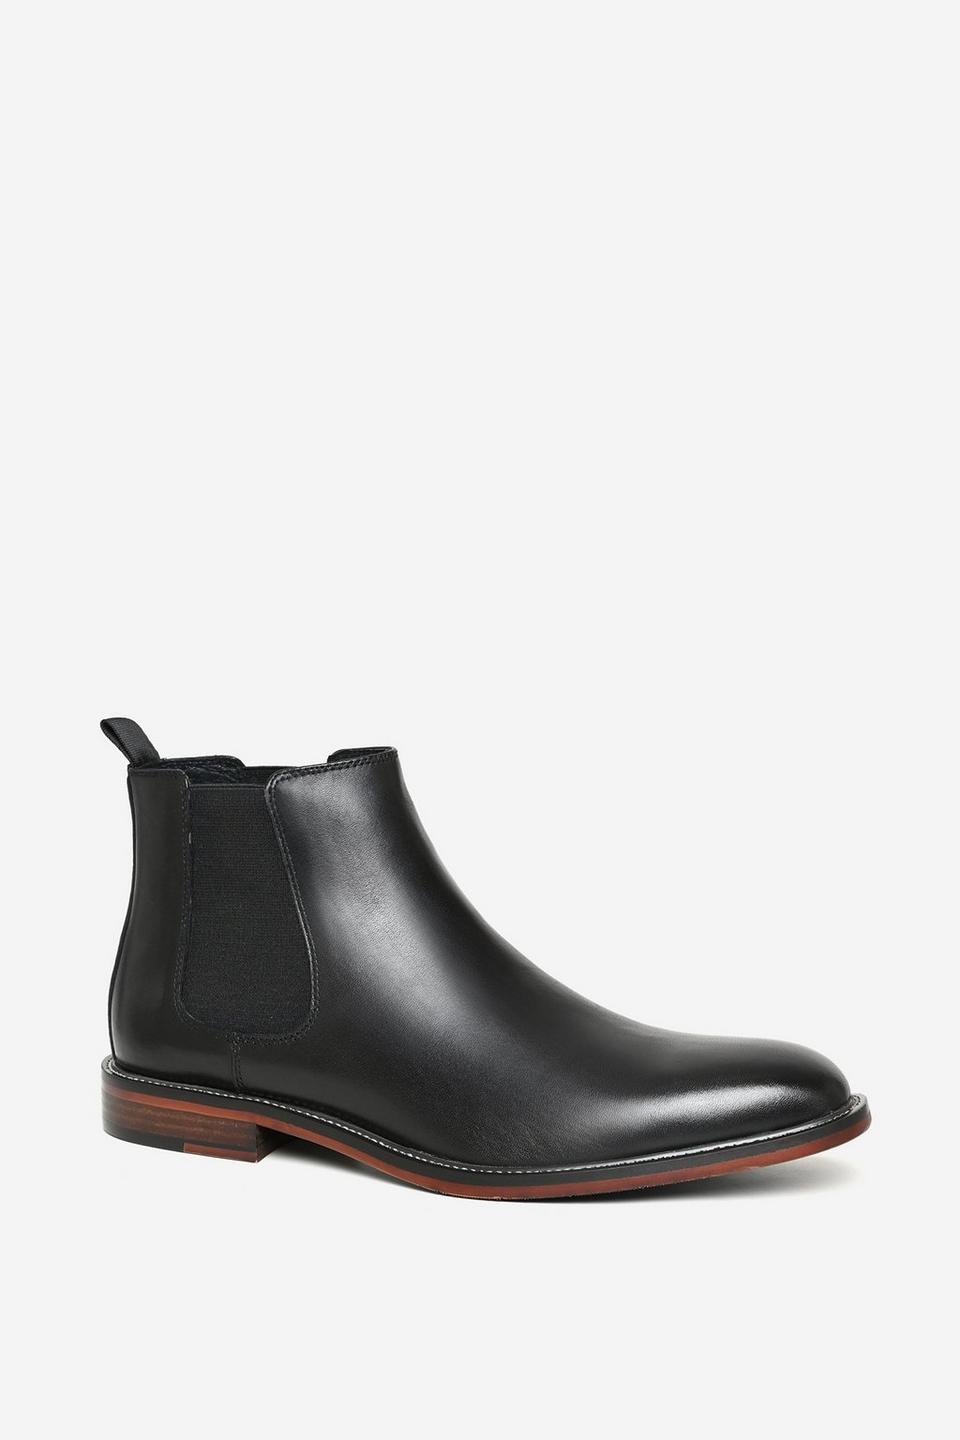 Boots | 'Silas' Premium Leather Chelsea Boots | Alexander Pace